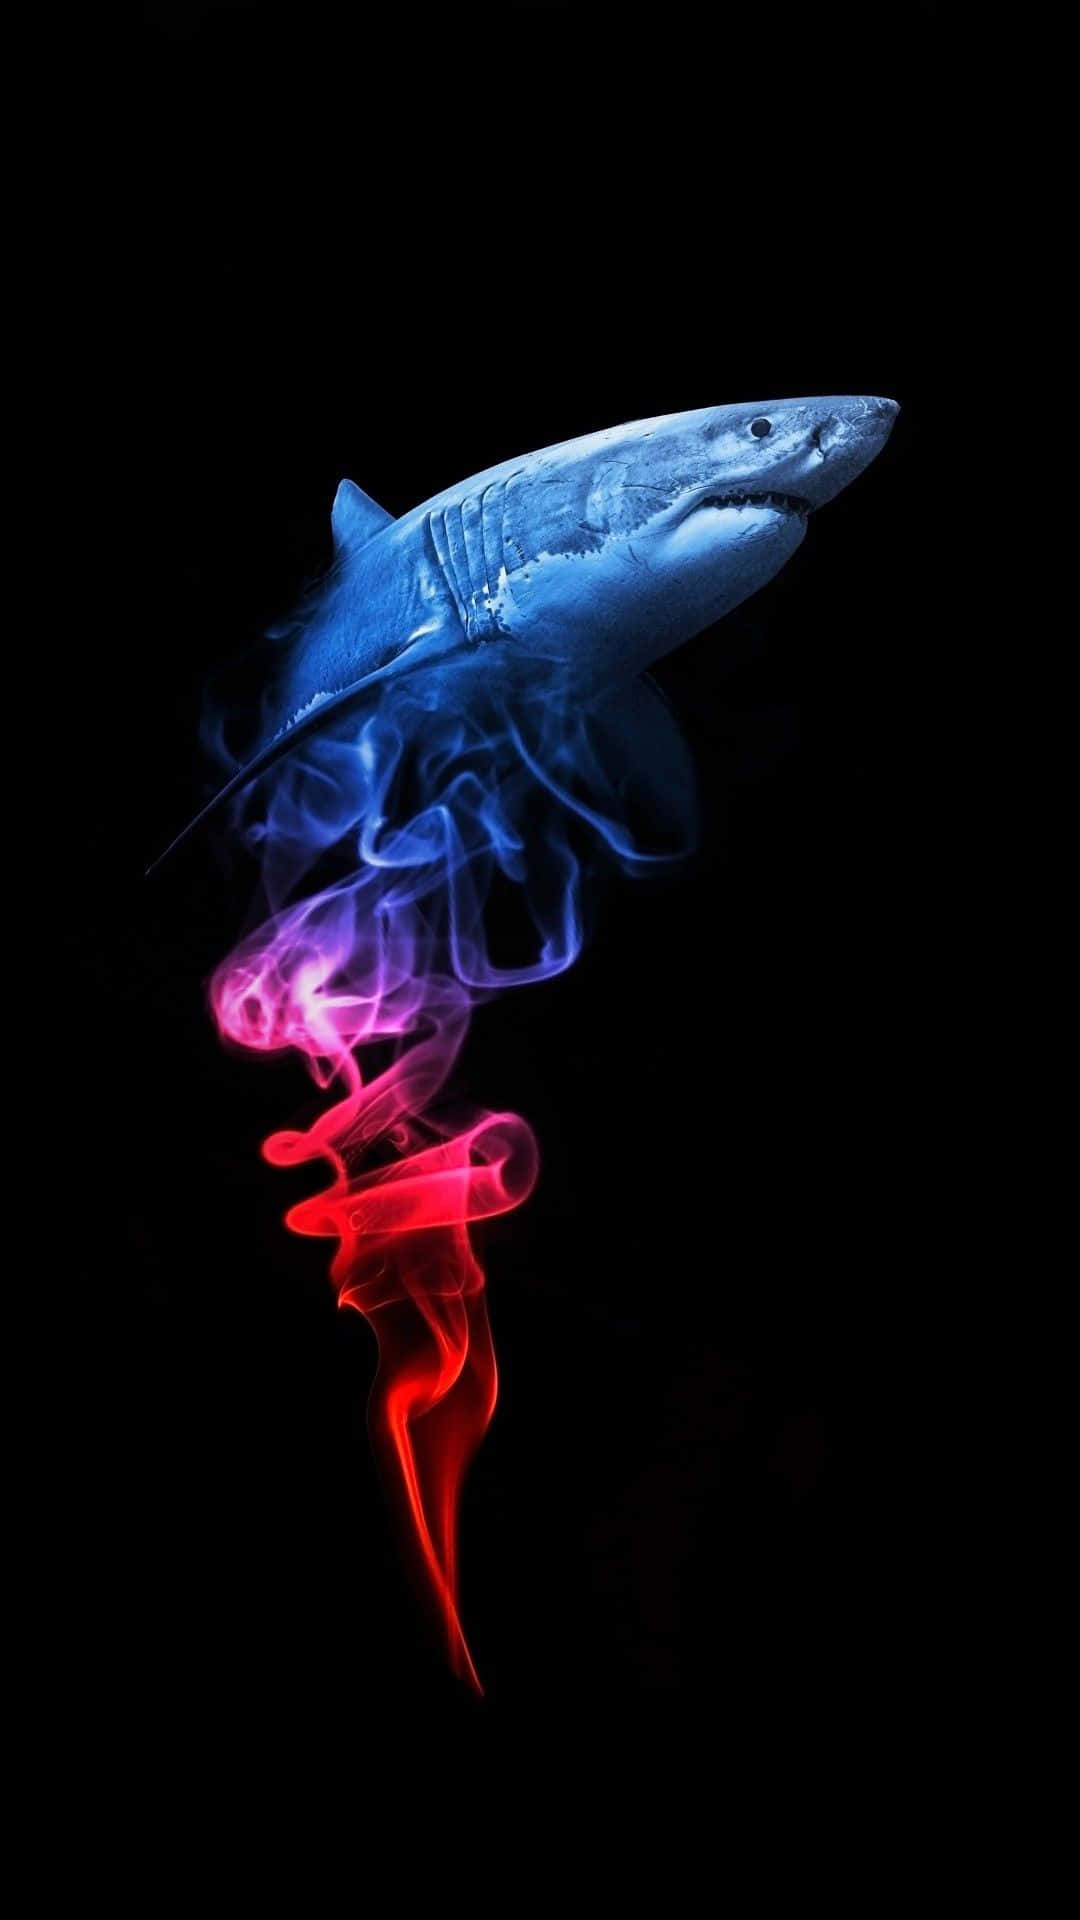 Get the latest iPhone with a shark inspired design! Wallpaper